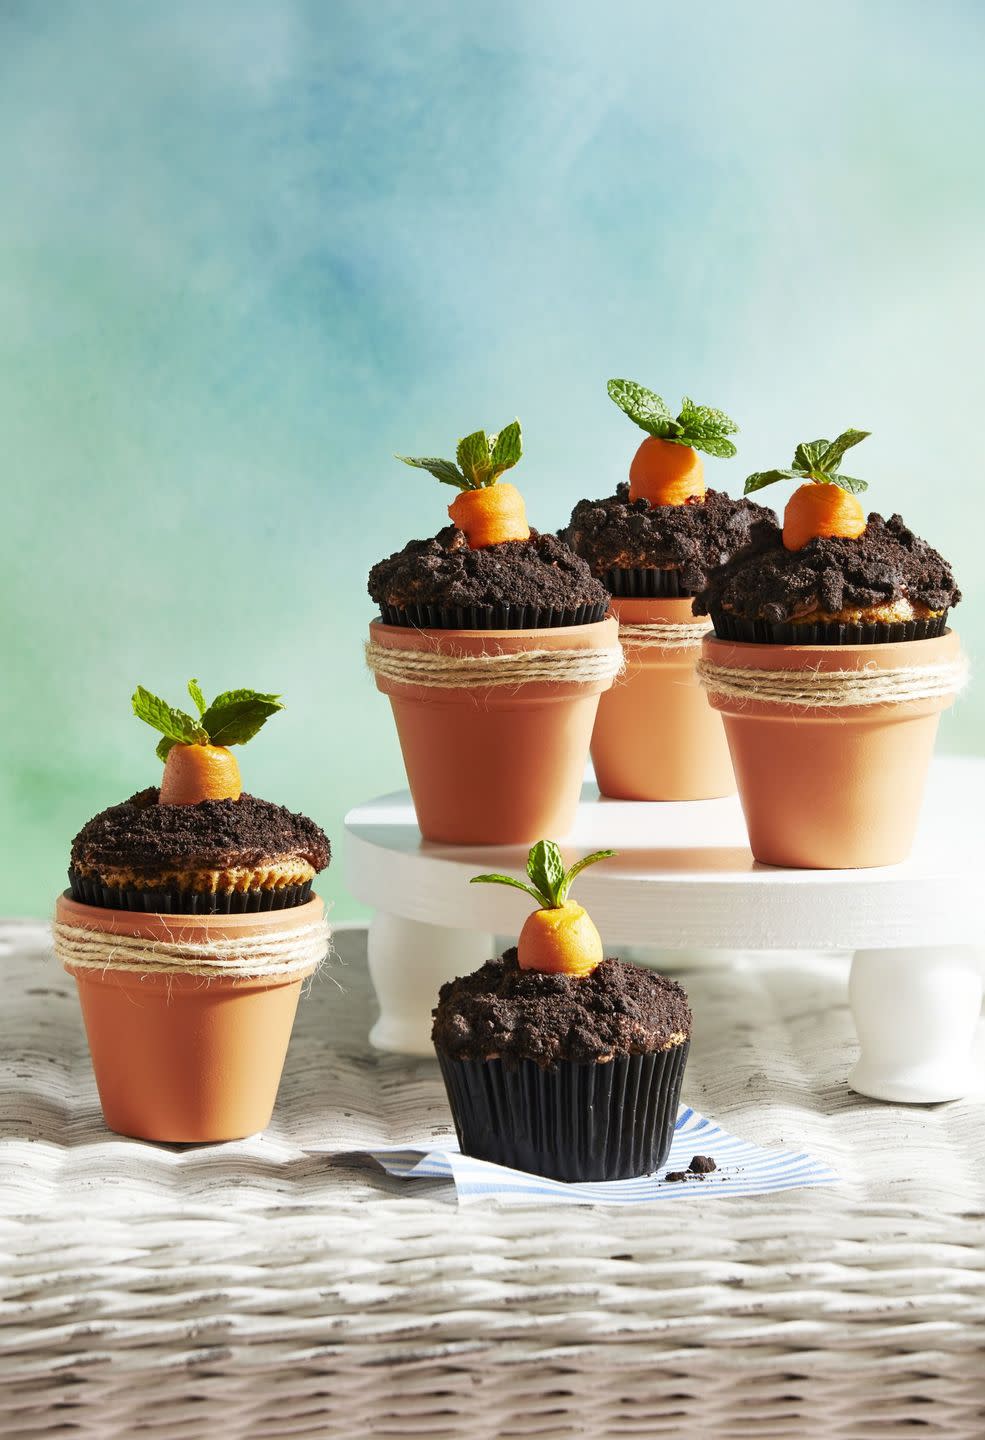 carrot patch cupcakes placed in mini terracotta pots and decorated to look like dirt on top with a carrot coming out